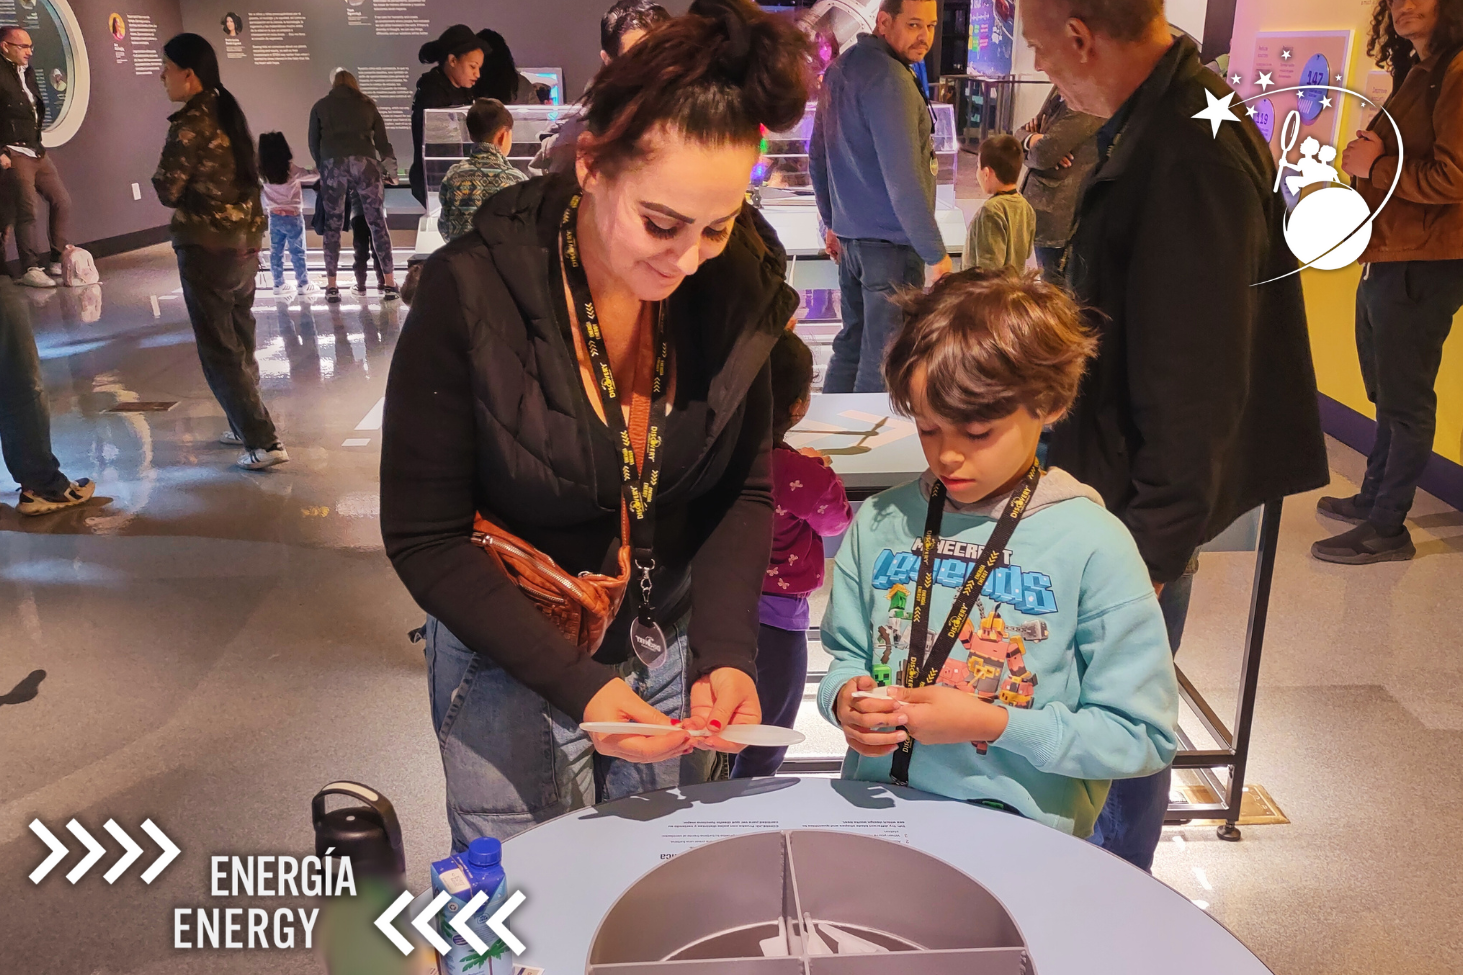 a mother and her son holding small plastic propellers at an exhibit at the Discovery Children's Museum